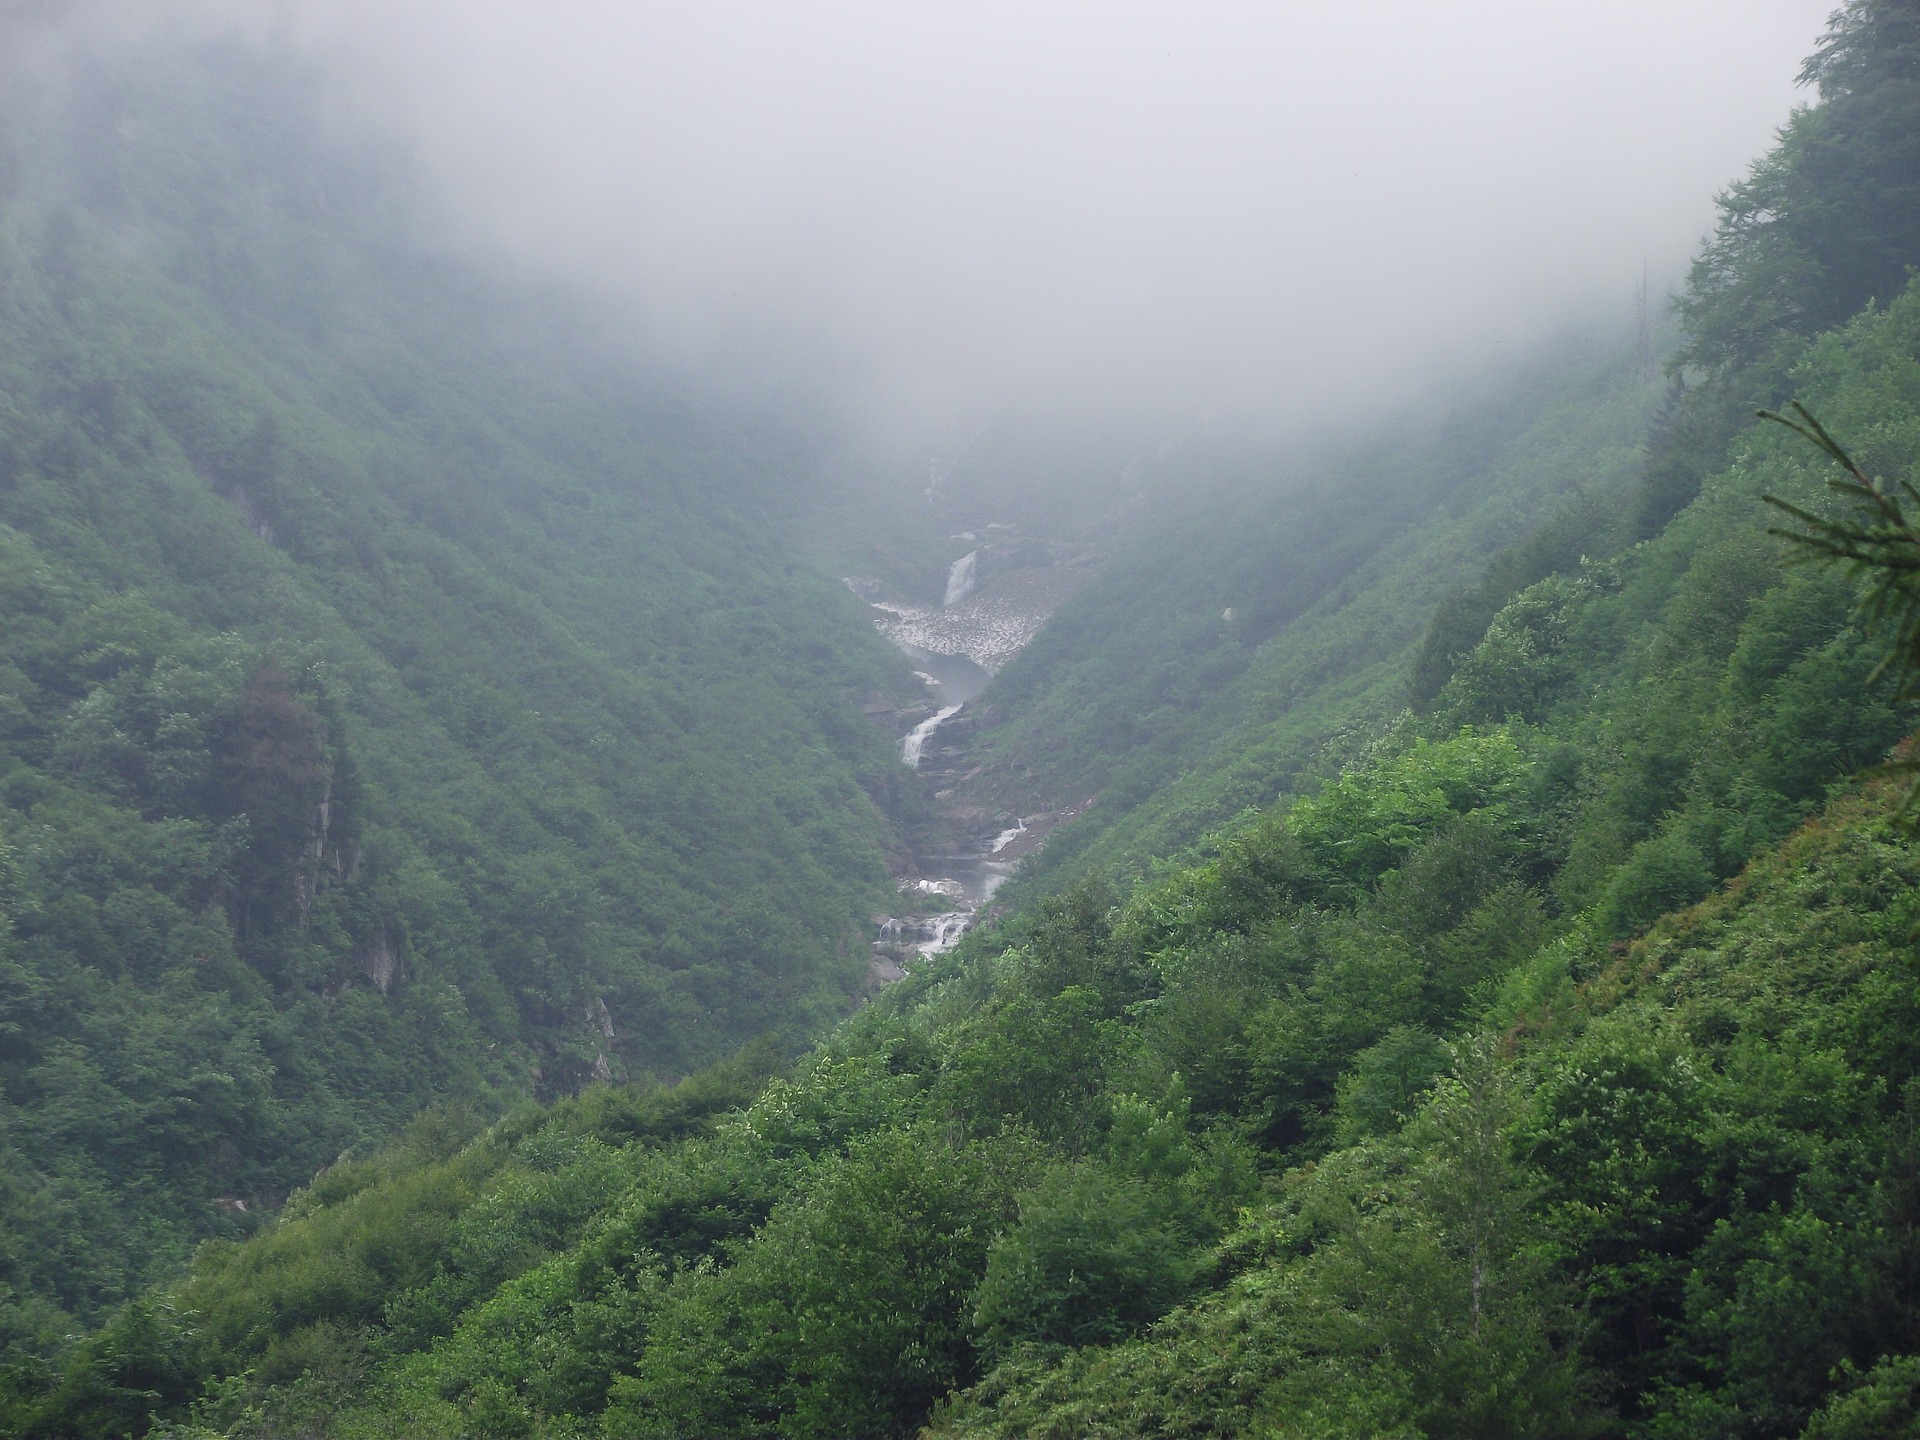 Ayder Tour – An Unforgettable Journey in the Beauty of Nature – Departing from Rize